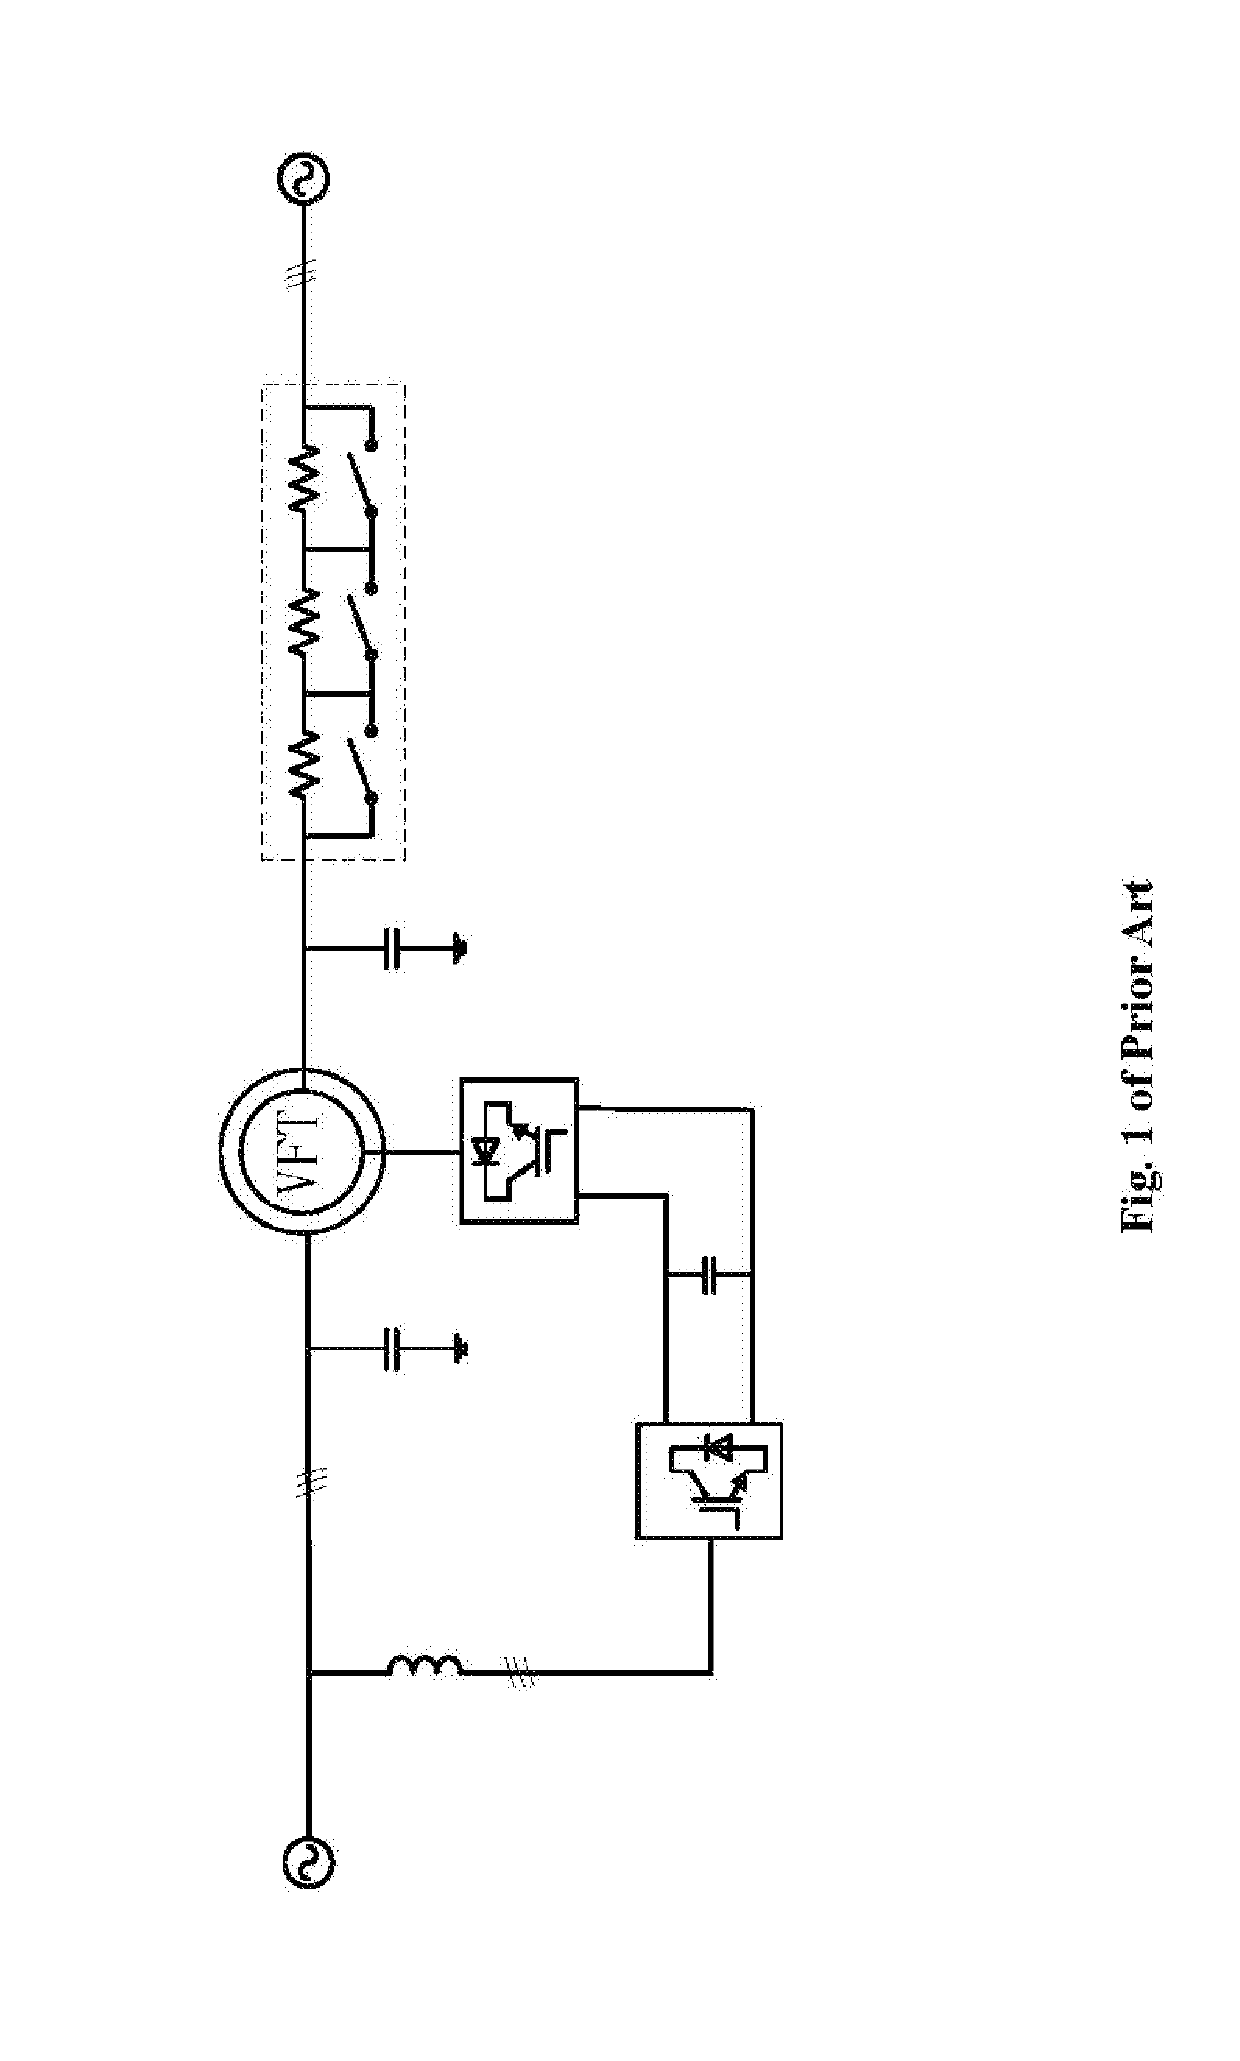 Fault ride-through circuit with variable frequency transformer and control method thereof